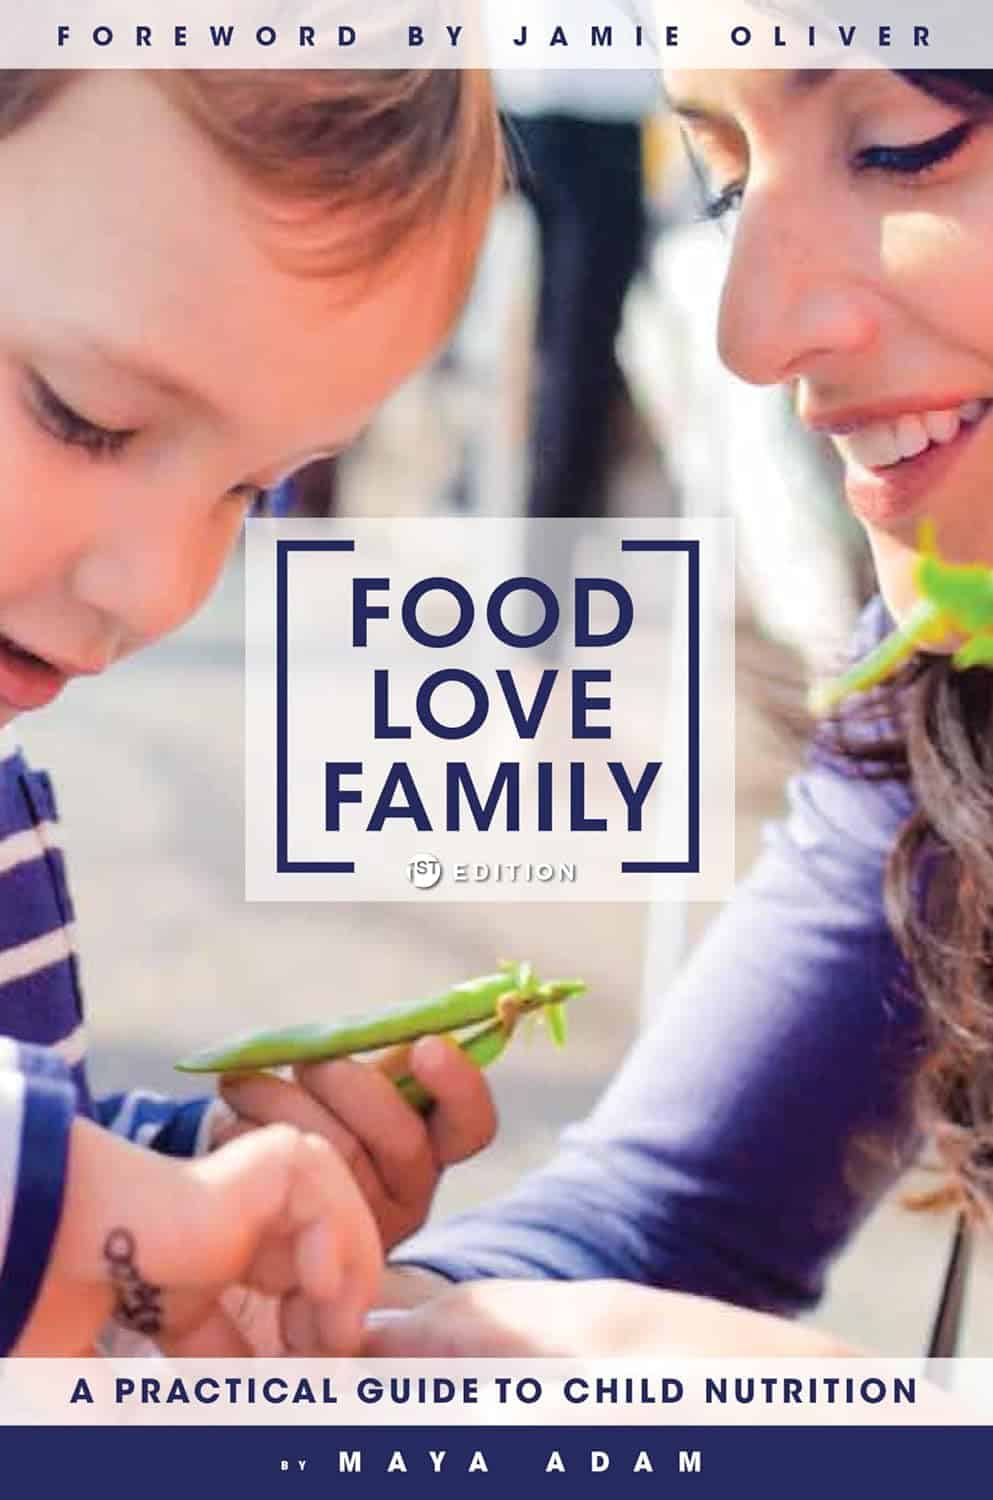 Food, Love, Family A Practical Guide to Child Nutrition -Maya Adam, Jamie Oliver